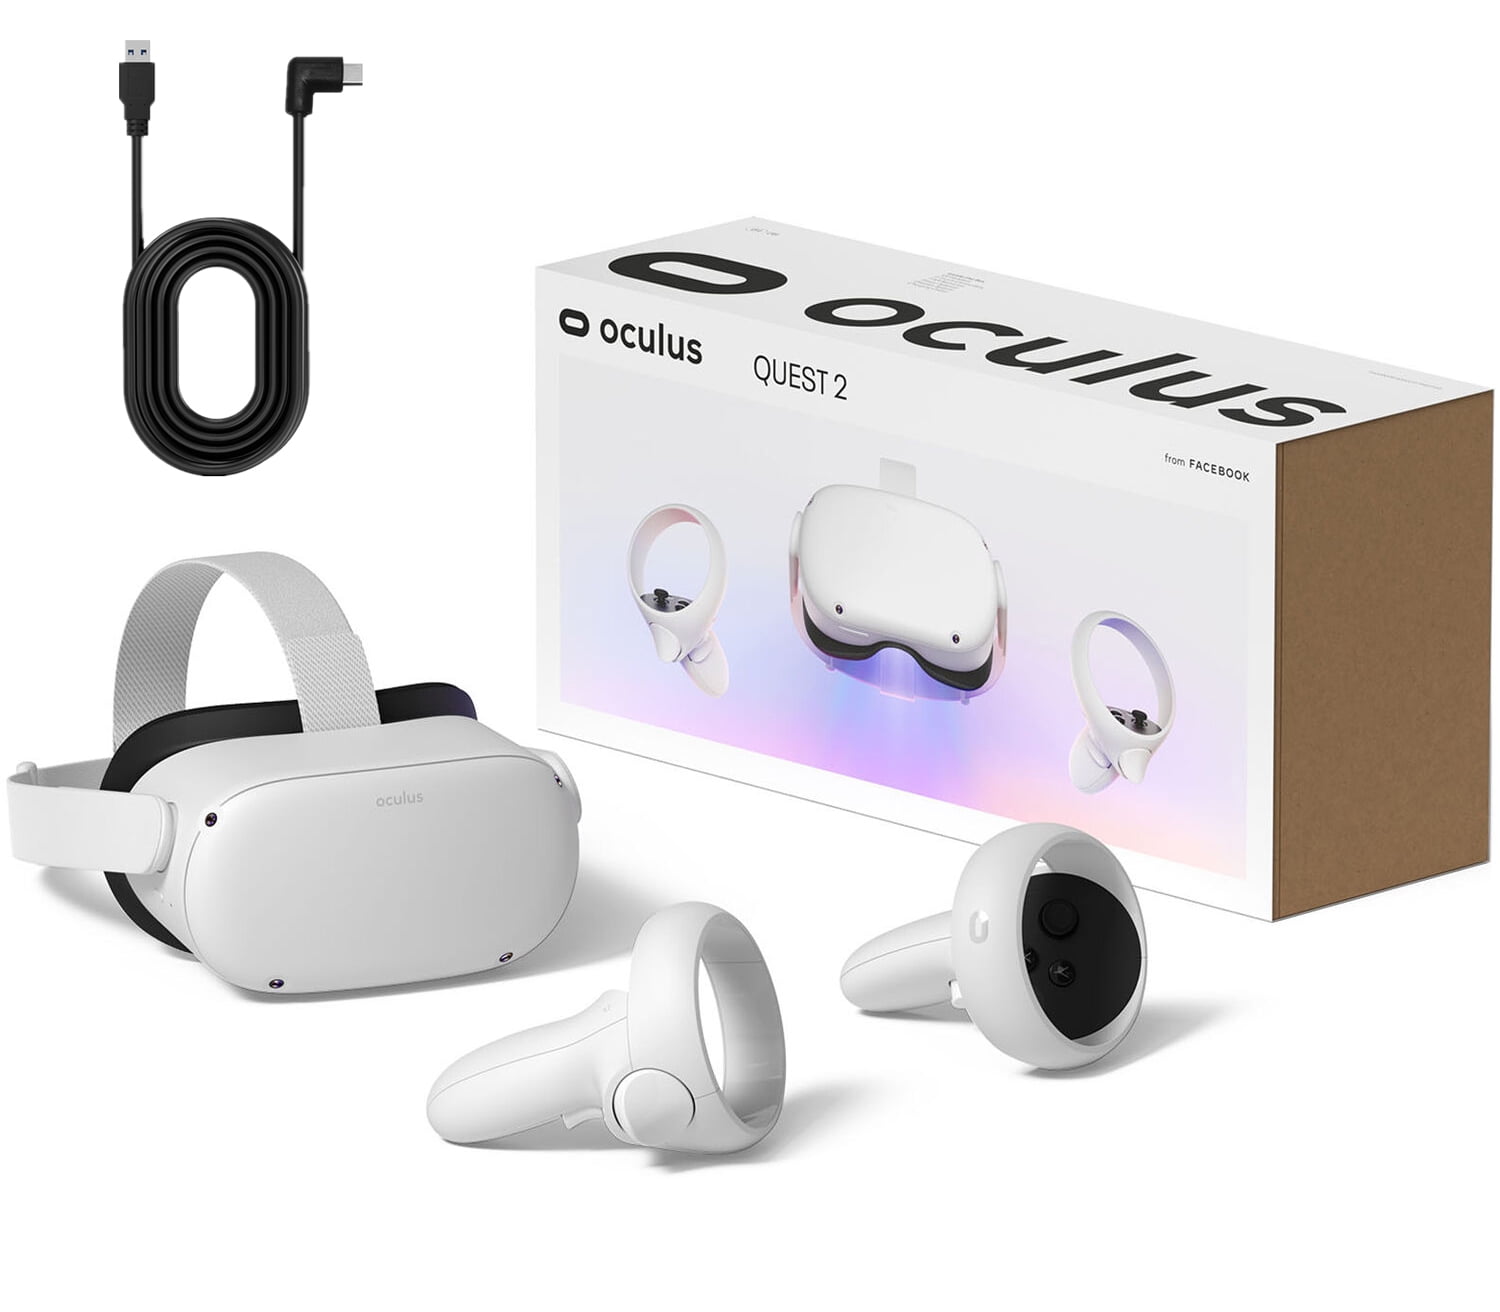 Træ Kro Højttaler Oculus Quest 2 - Advanced All-In-One Virtual Reality Gaming Headset -  White- 64GB Video - 15FT USB Type-C Link Cable - Walmart.com